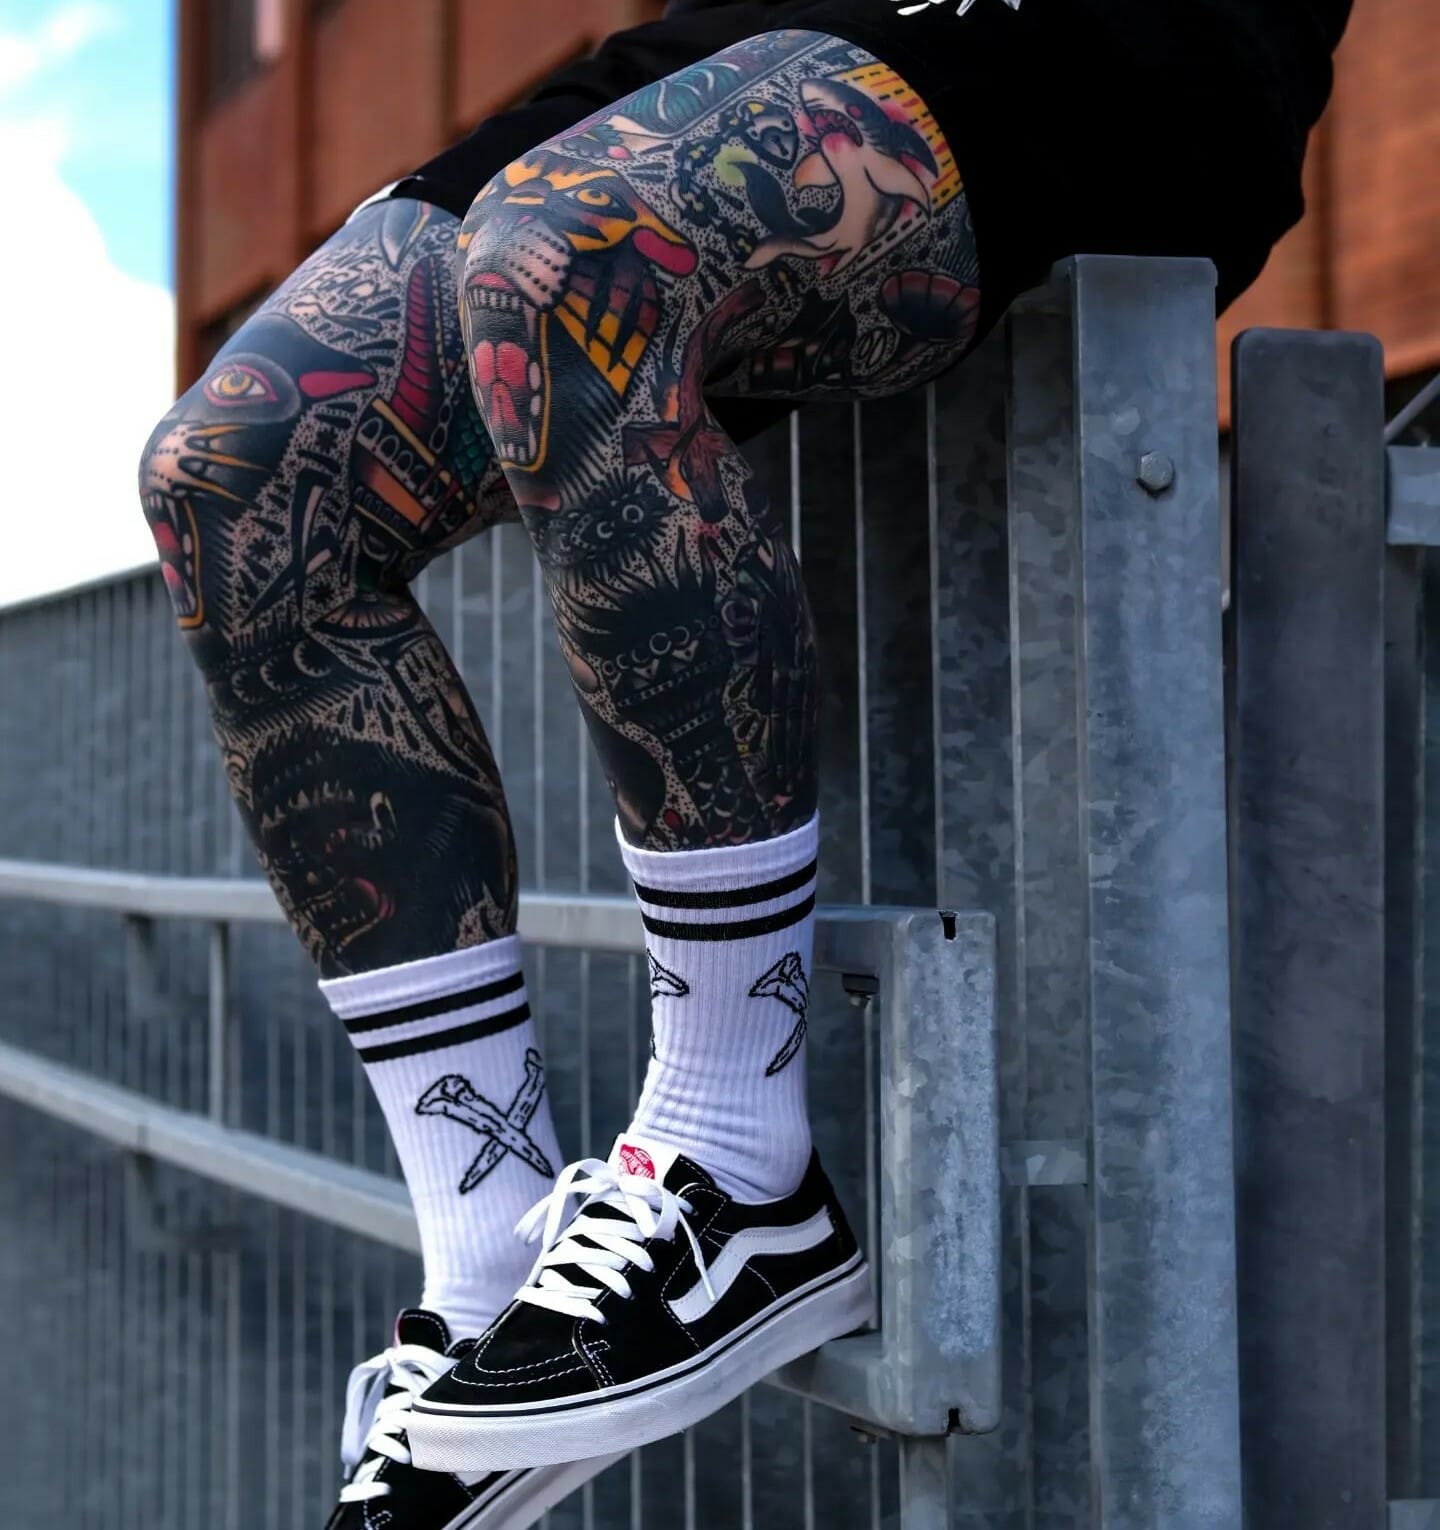 Forget About Arms With These 22 Inspiring Leg Sleeves  Tattoodo